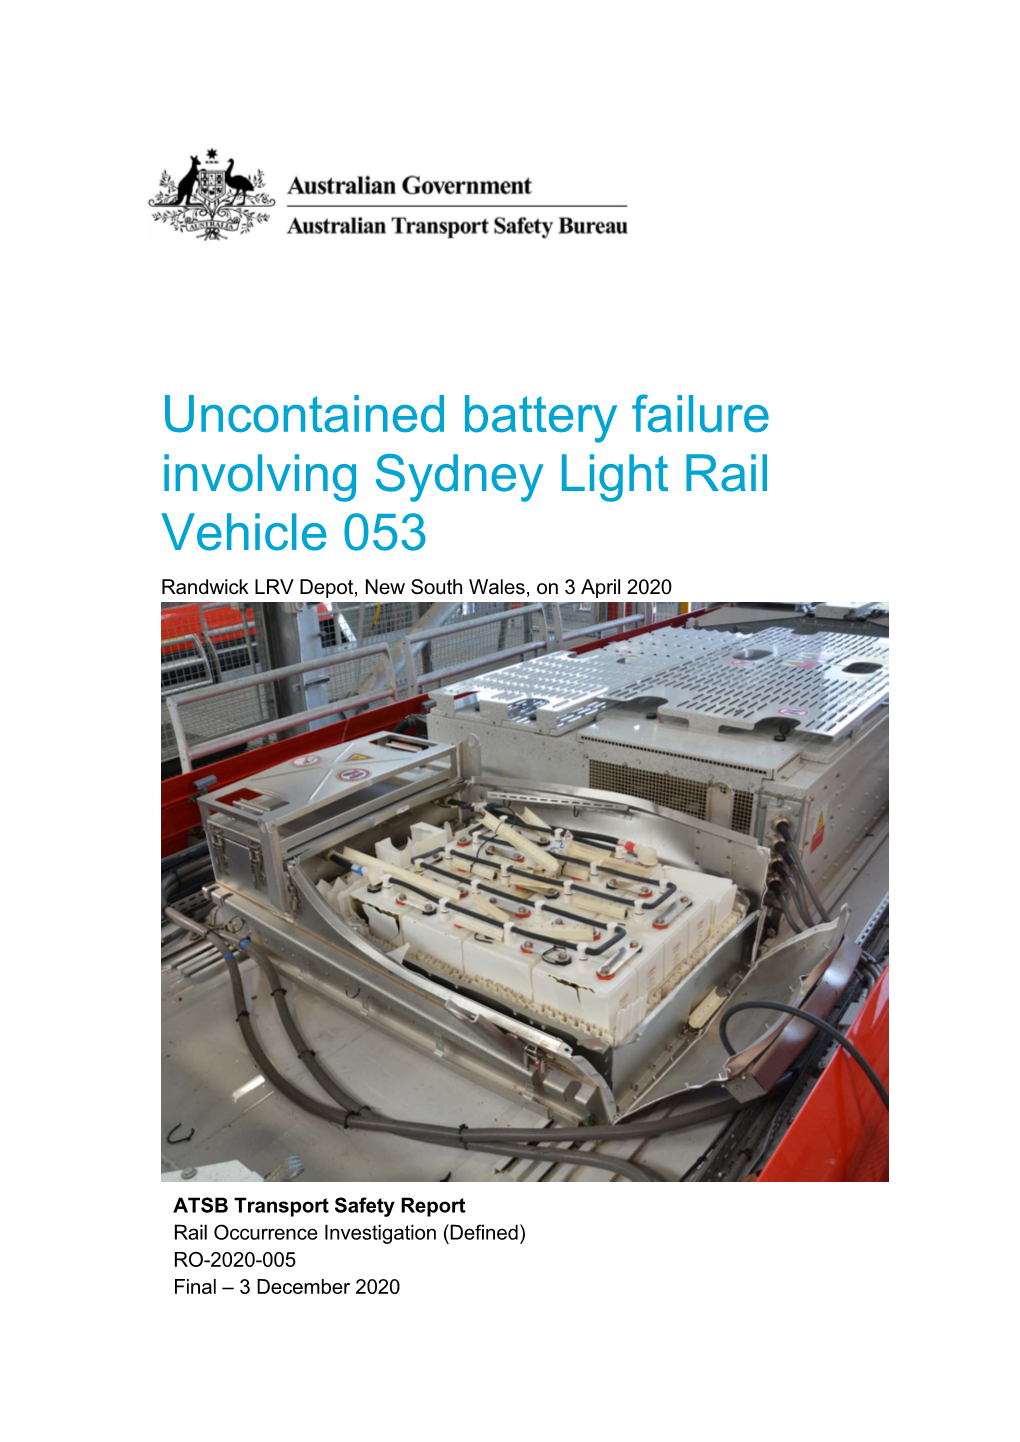 Uncontained Battery Failure Involving Sydney Light Rail Vehicle 053 Randwick LRV Depot, New South Wales, on 3 April 2020